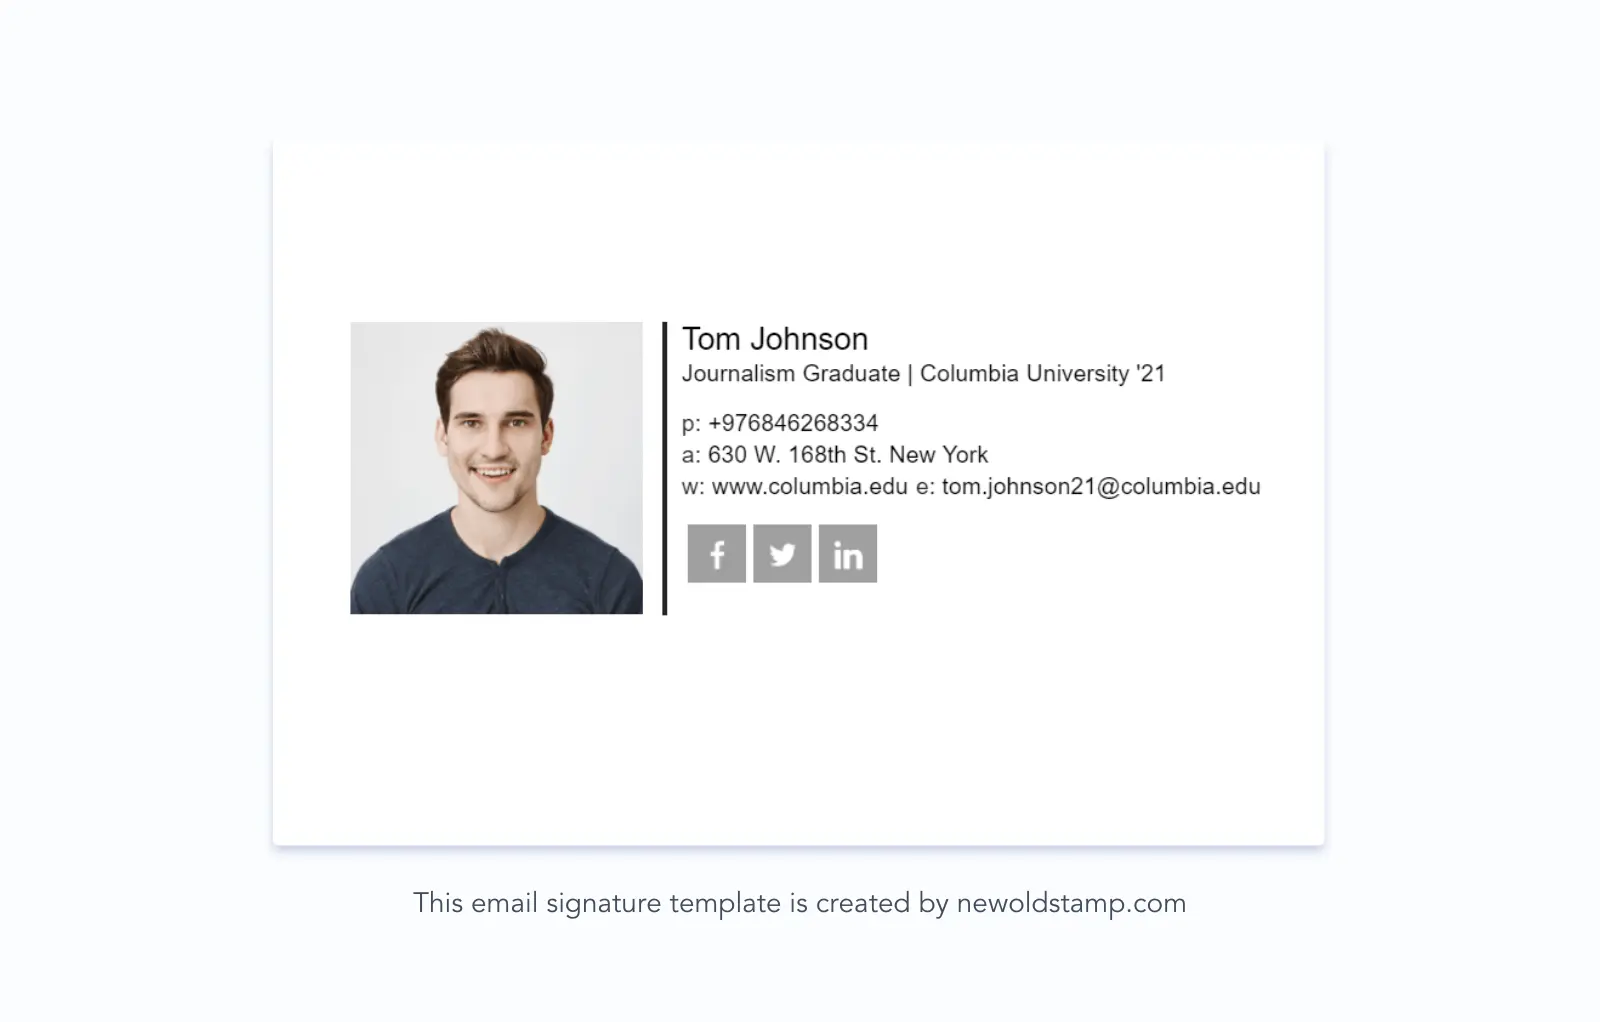 Example 2. College student email signature with social icons